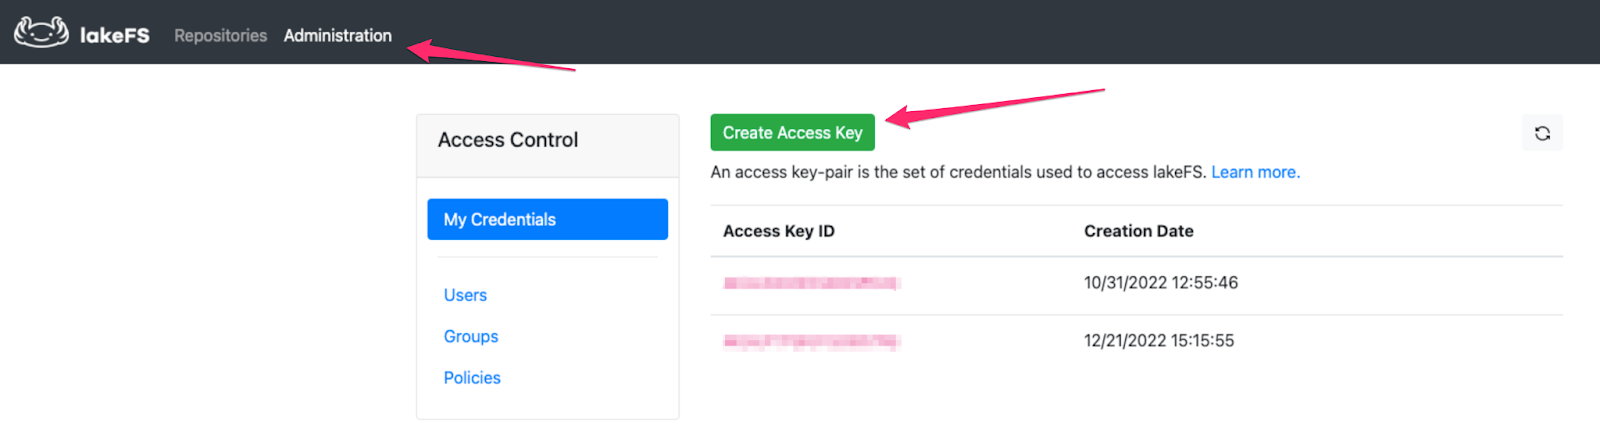 Login to lakeFS and click create access key